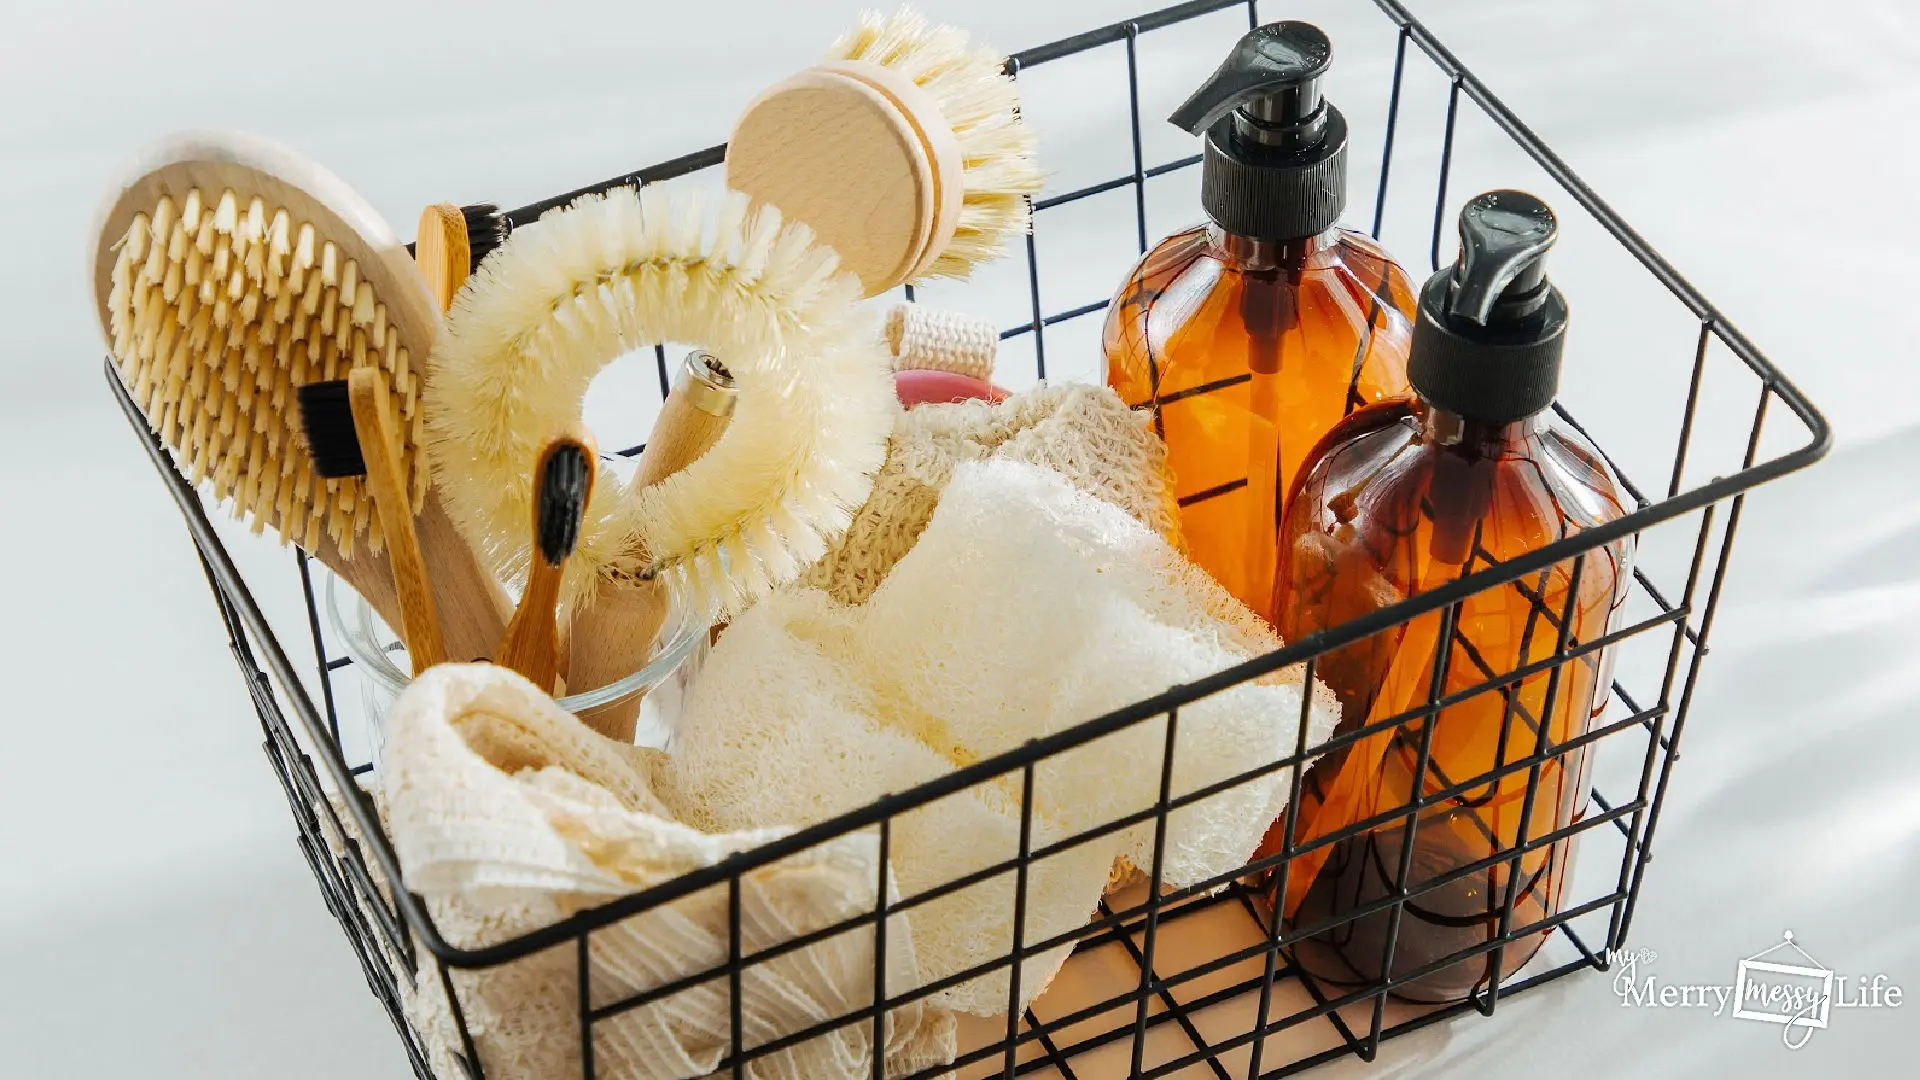 How to Make Cheap Natural Bathroom Cleaners at Home